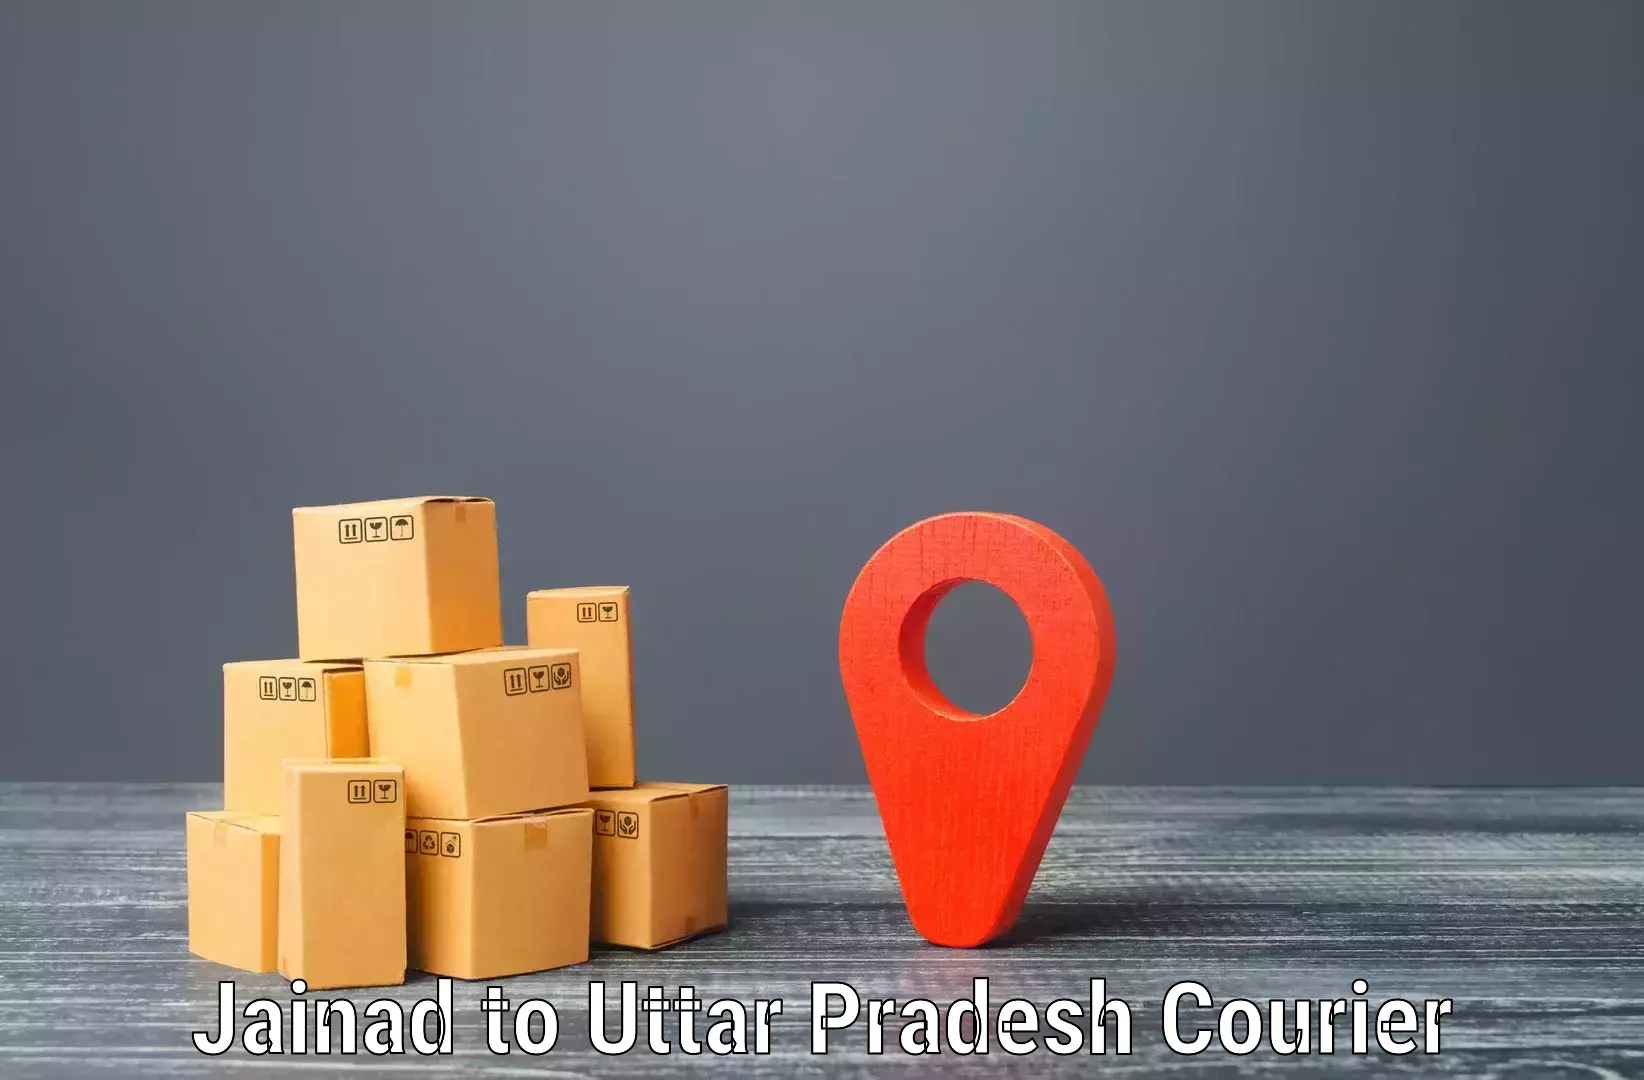 Sustainable courier practices Jainad to Laharpur